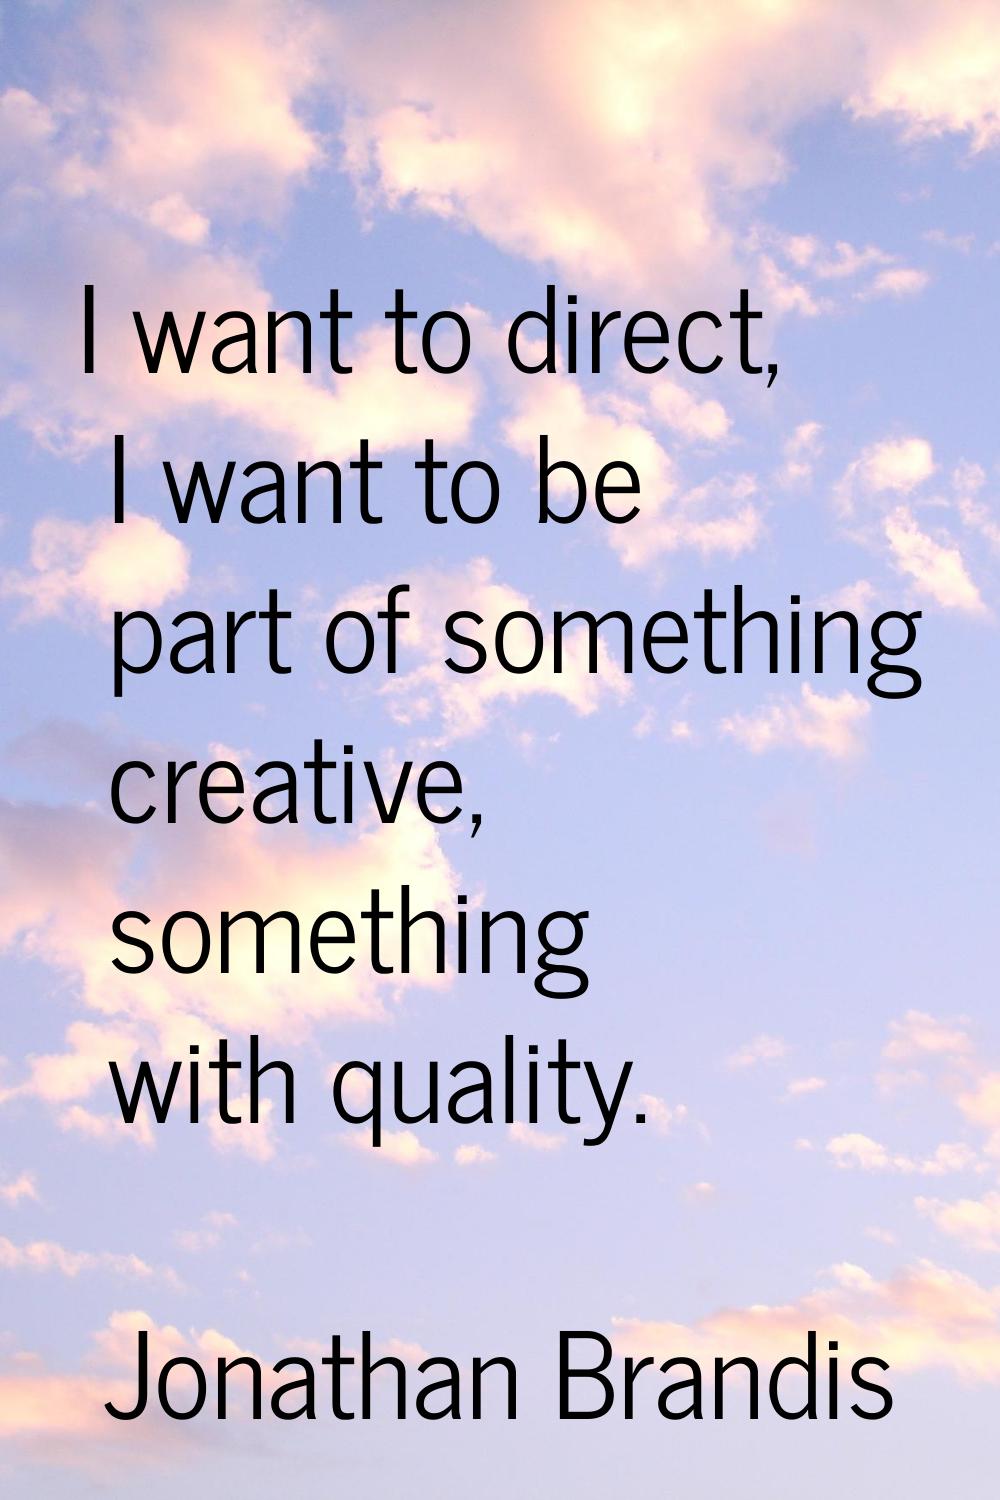 I want to direct, I want to be part of something creative, something with quality.